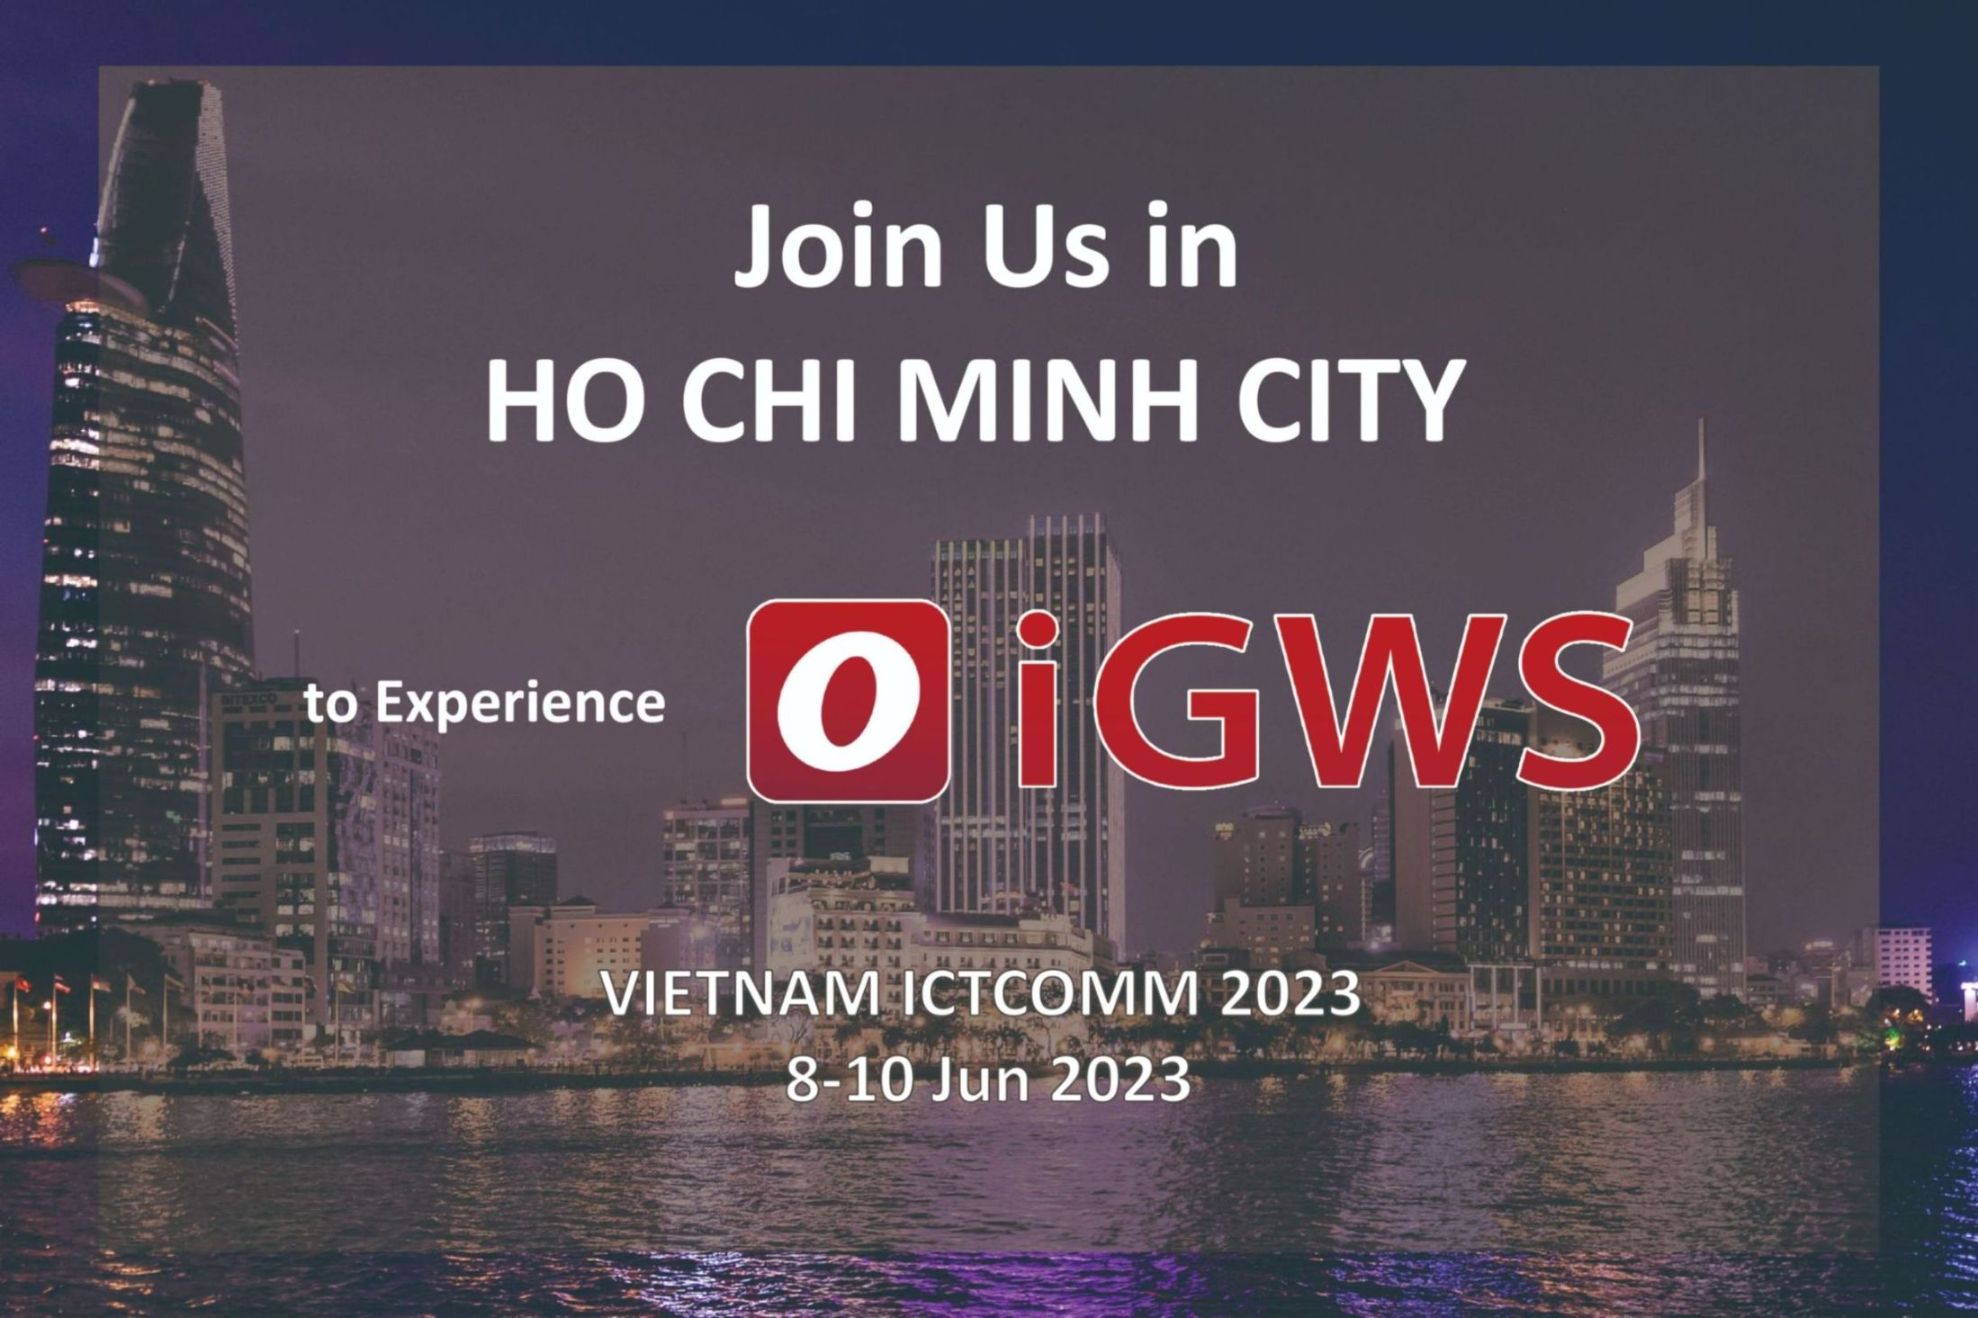 iGWS Showcasing at ICTCOMM 2023 in Ho Chi Minh City!